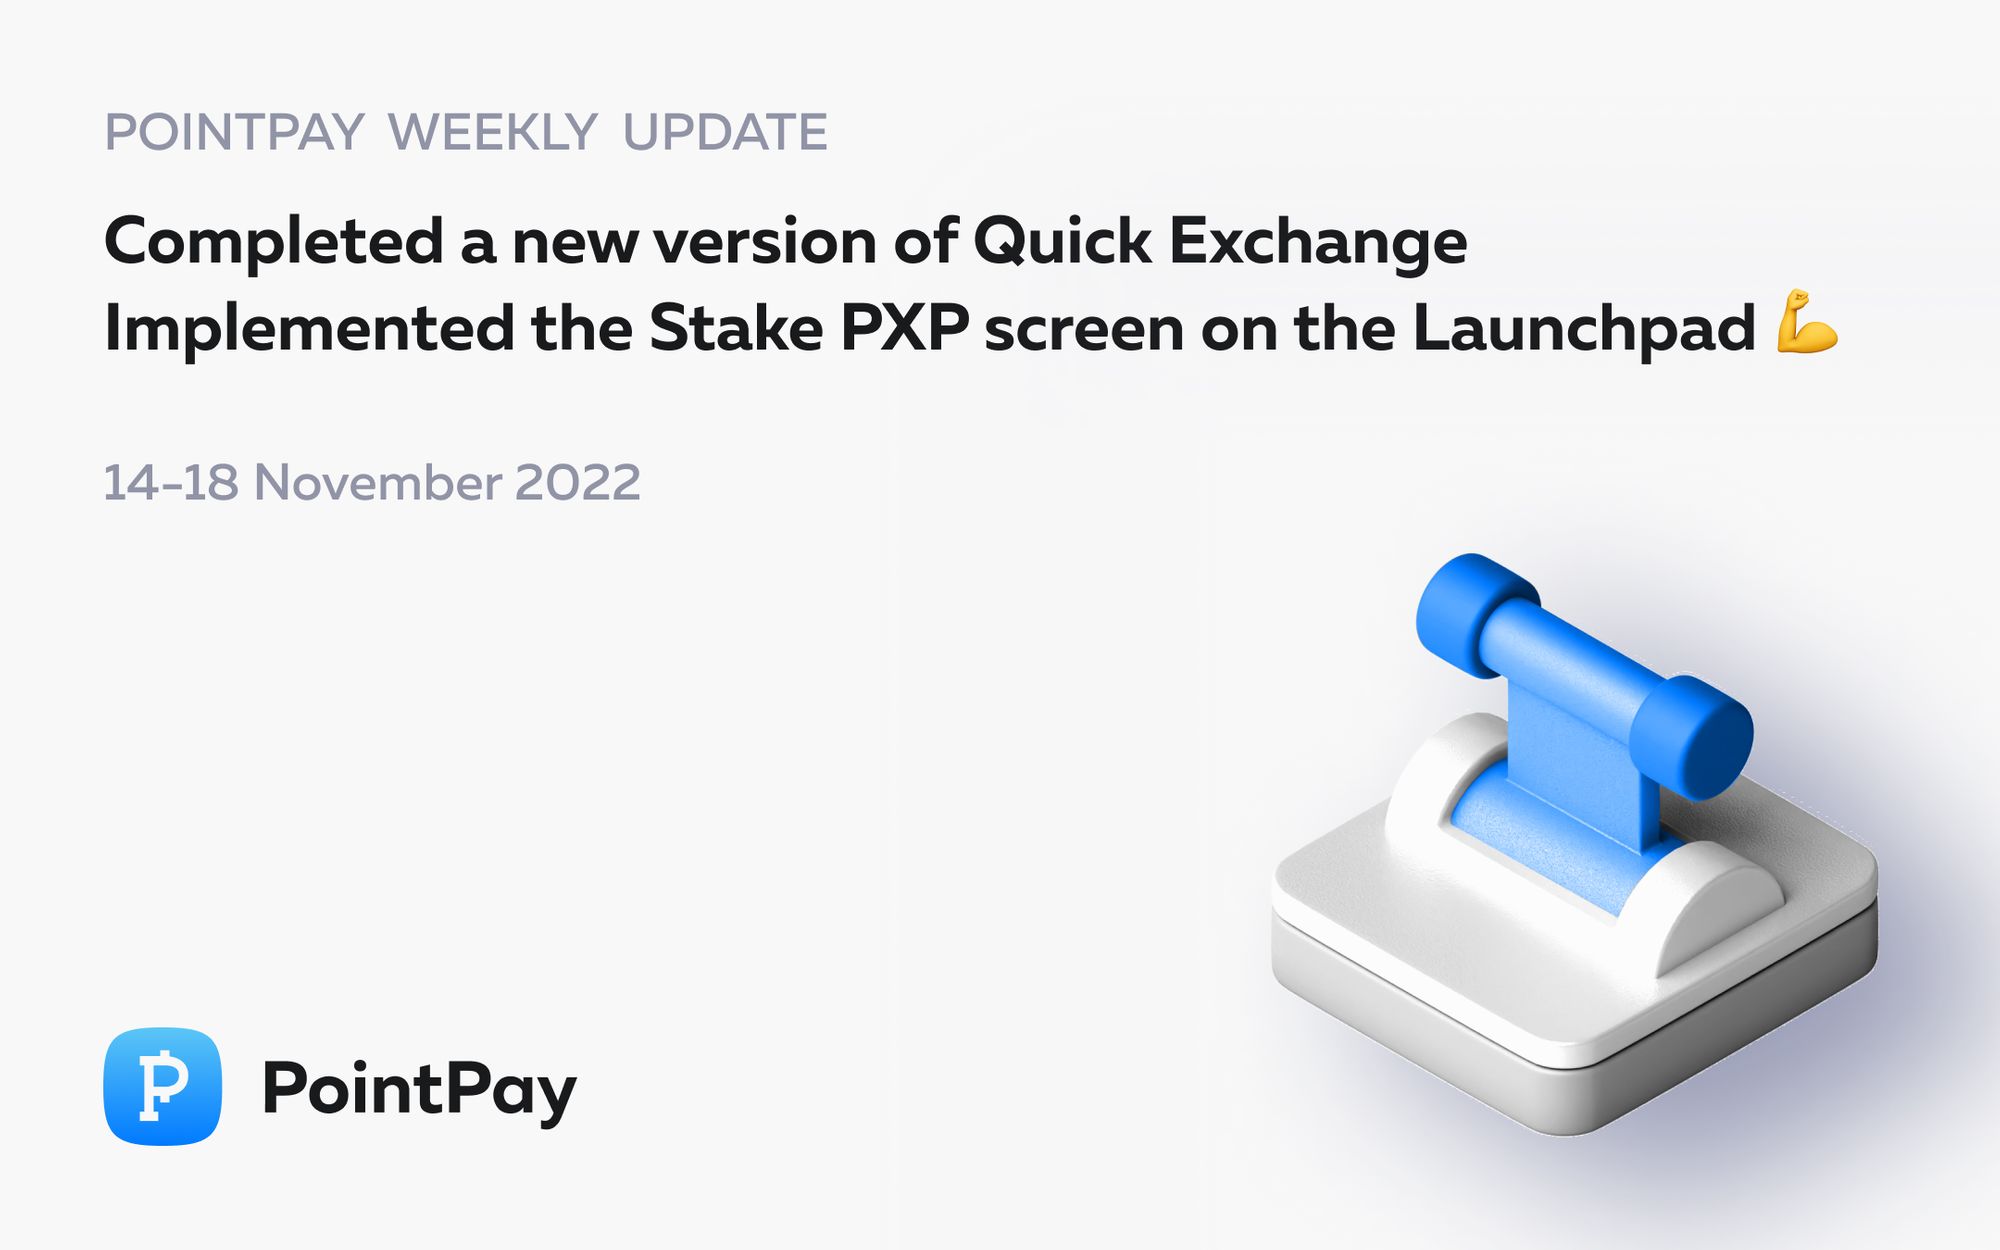 PointPay Weekly Update (14 - 18 November 2022)